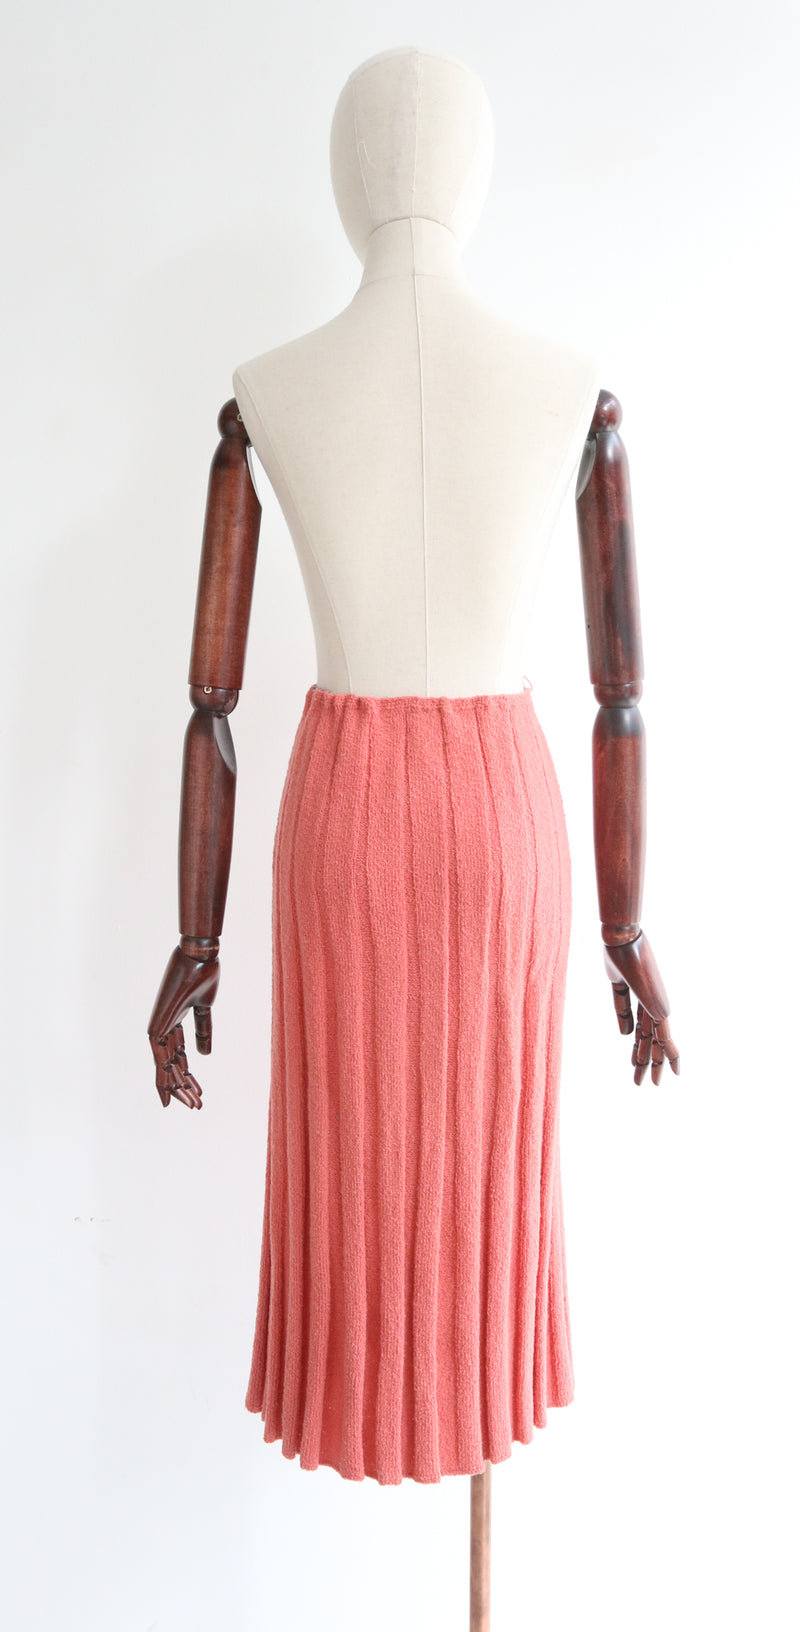 "Coral & Taupe" Vintage 1930's Coral & Taupe Three Piece Knit Set UK 12-14 US 8-10